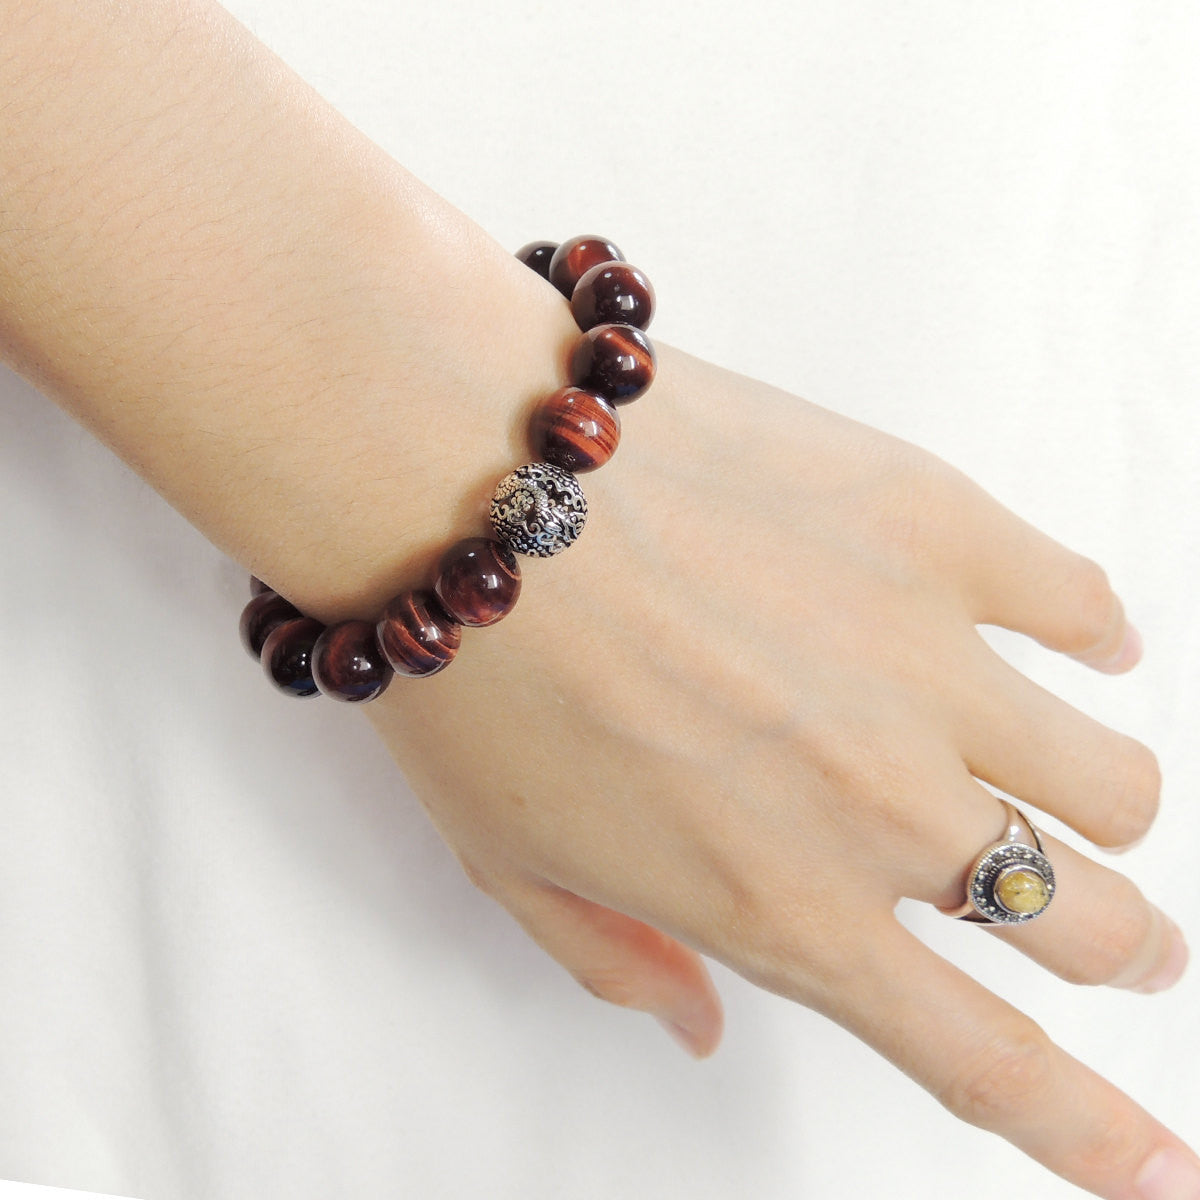 Healing High Quality Red Tiger Eye Gemstones, Non-Plated Sterling Silver Elegantly Carved Dragon Bead, Handmade Braided Adjustable Drawstring Bracelet, Symbol of protection, courage, tranquility, strength, love, spirituality